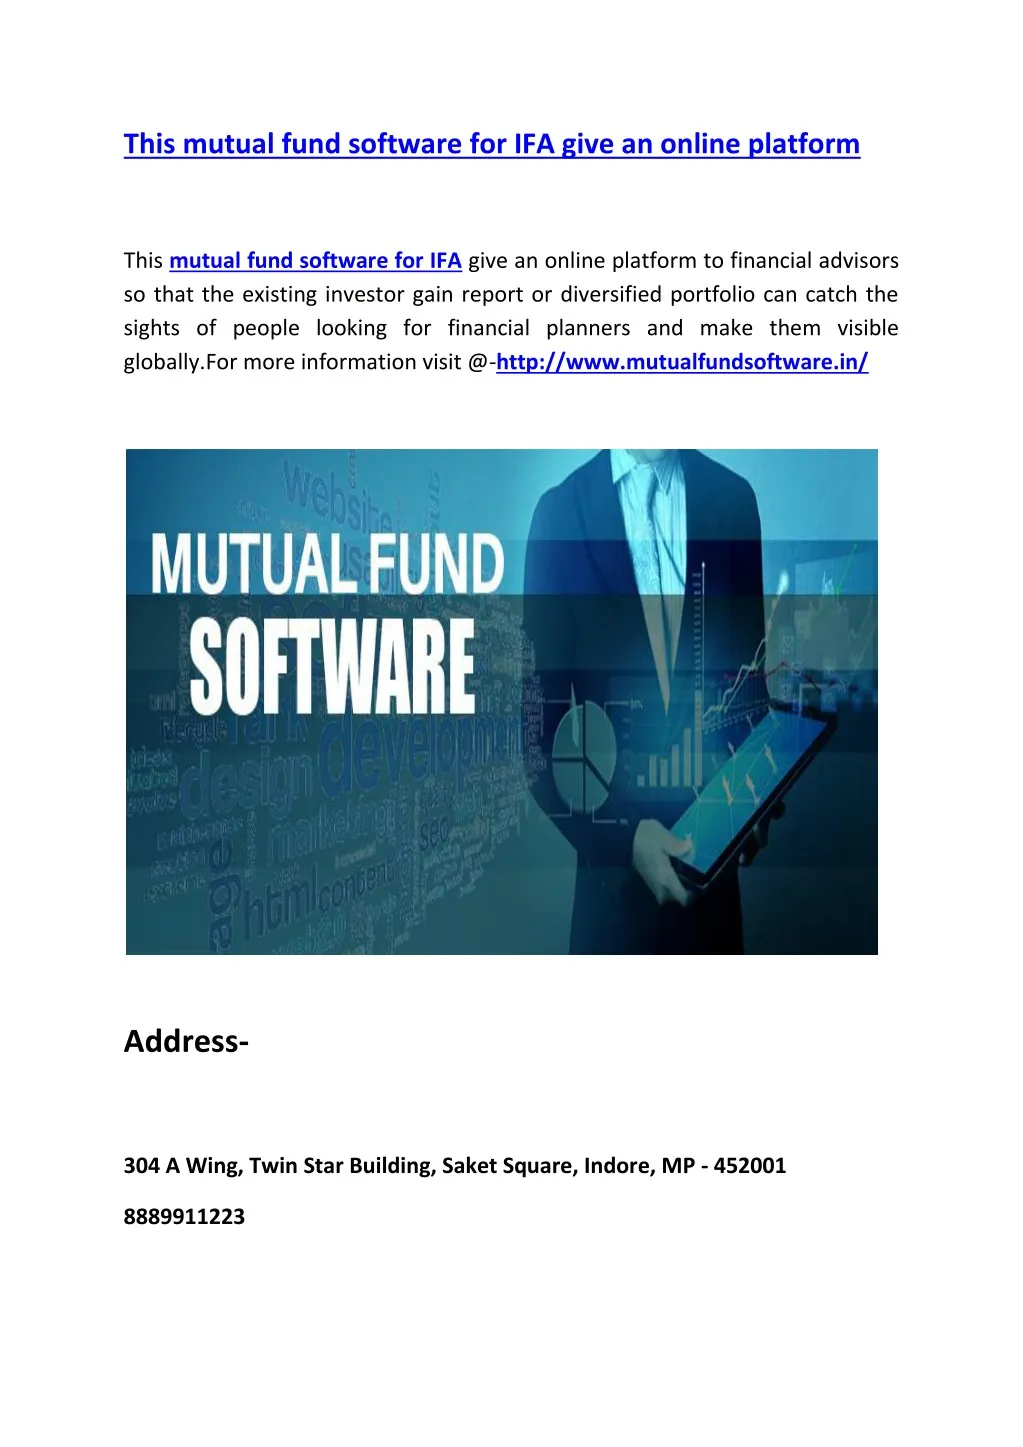 this mutual fund software for ifa give an online